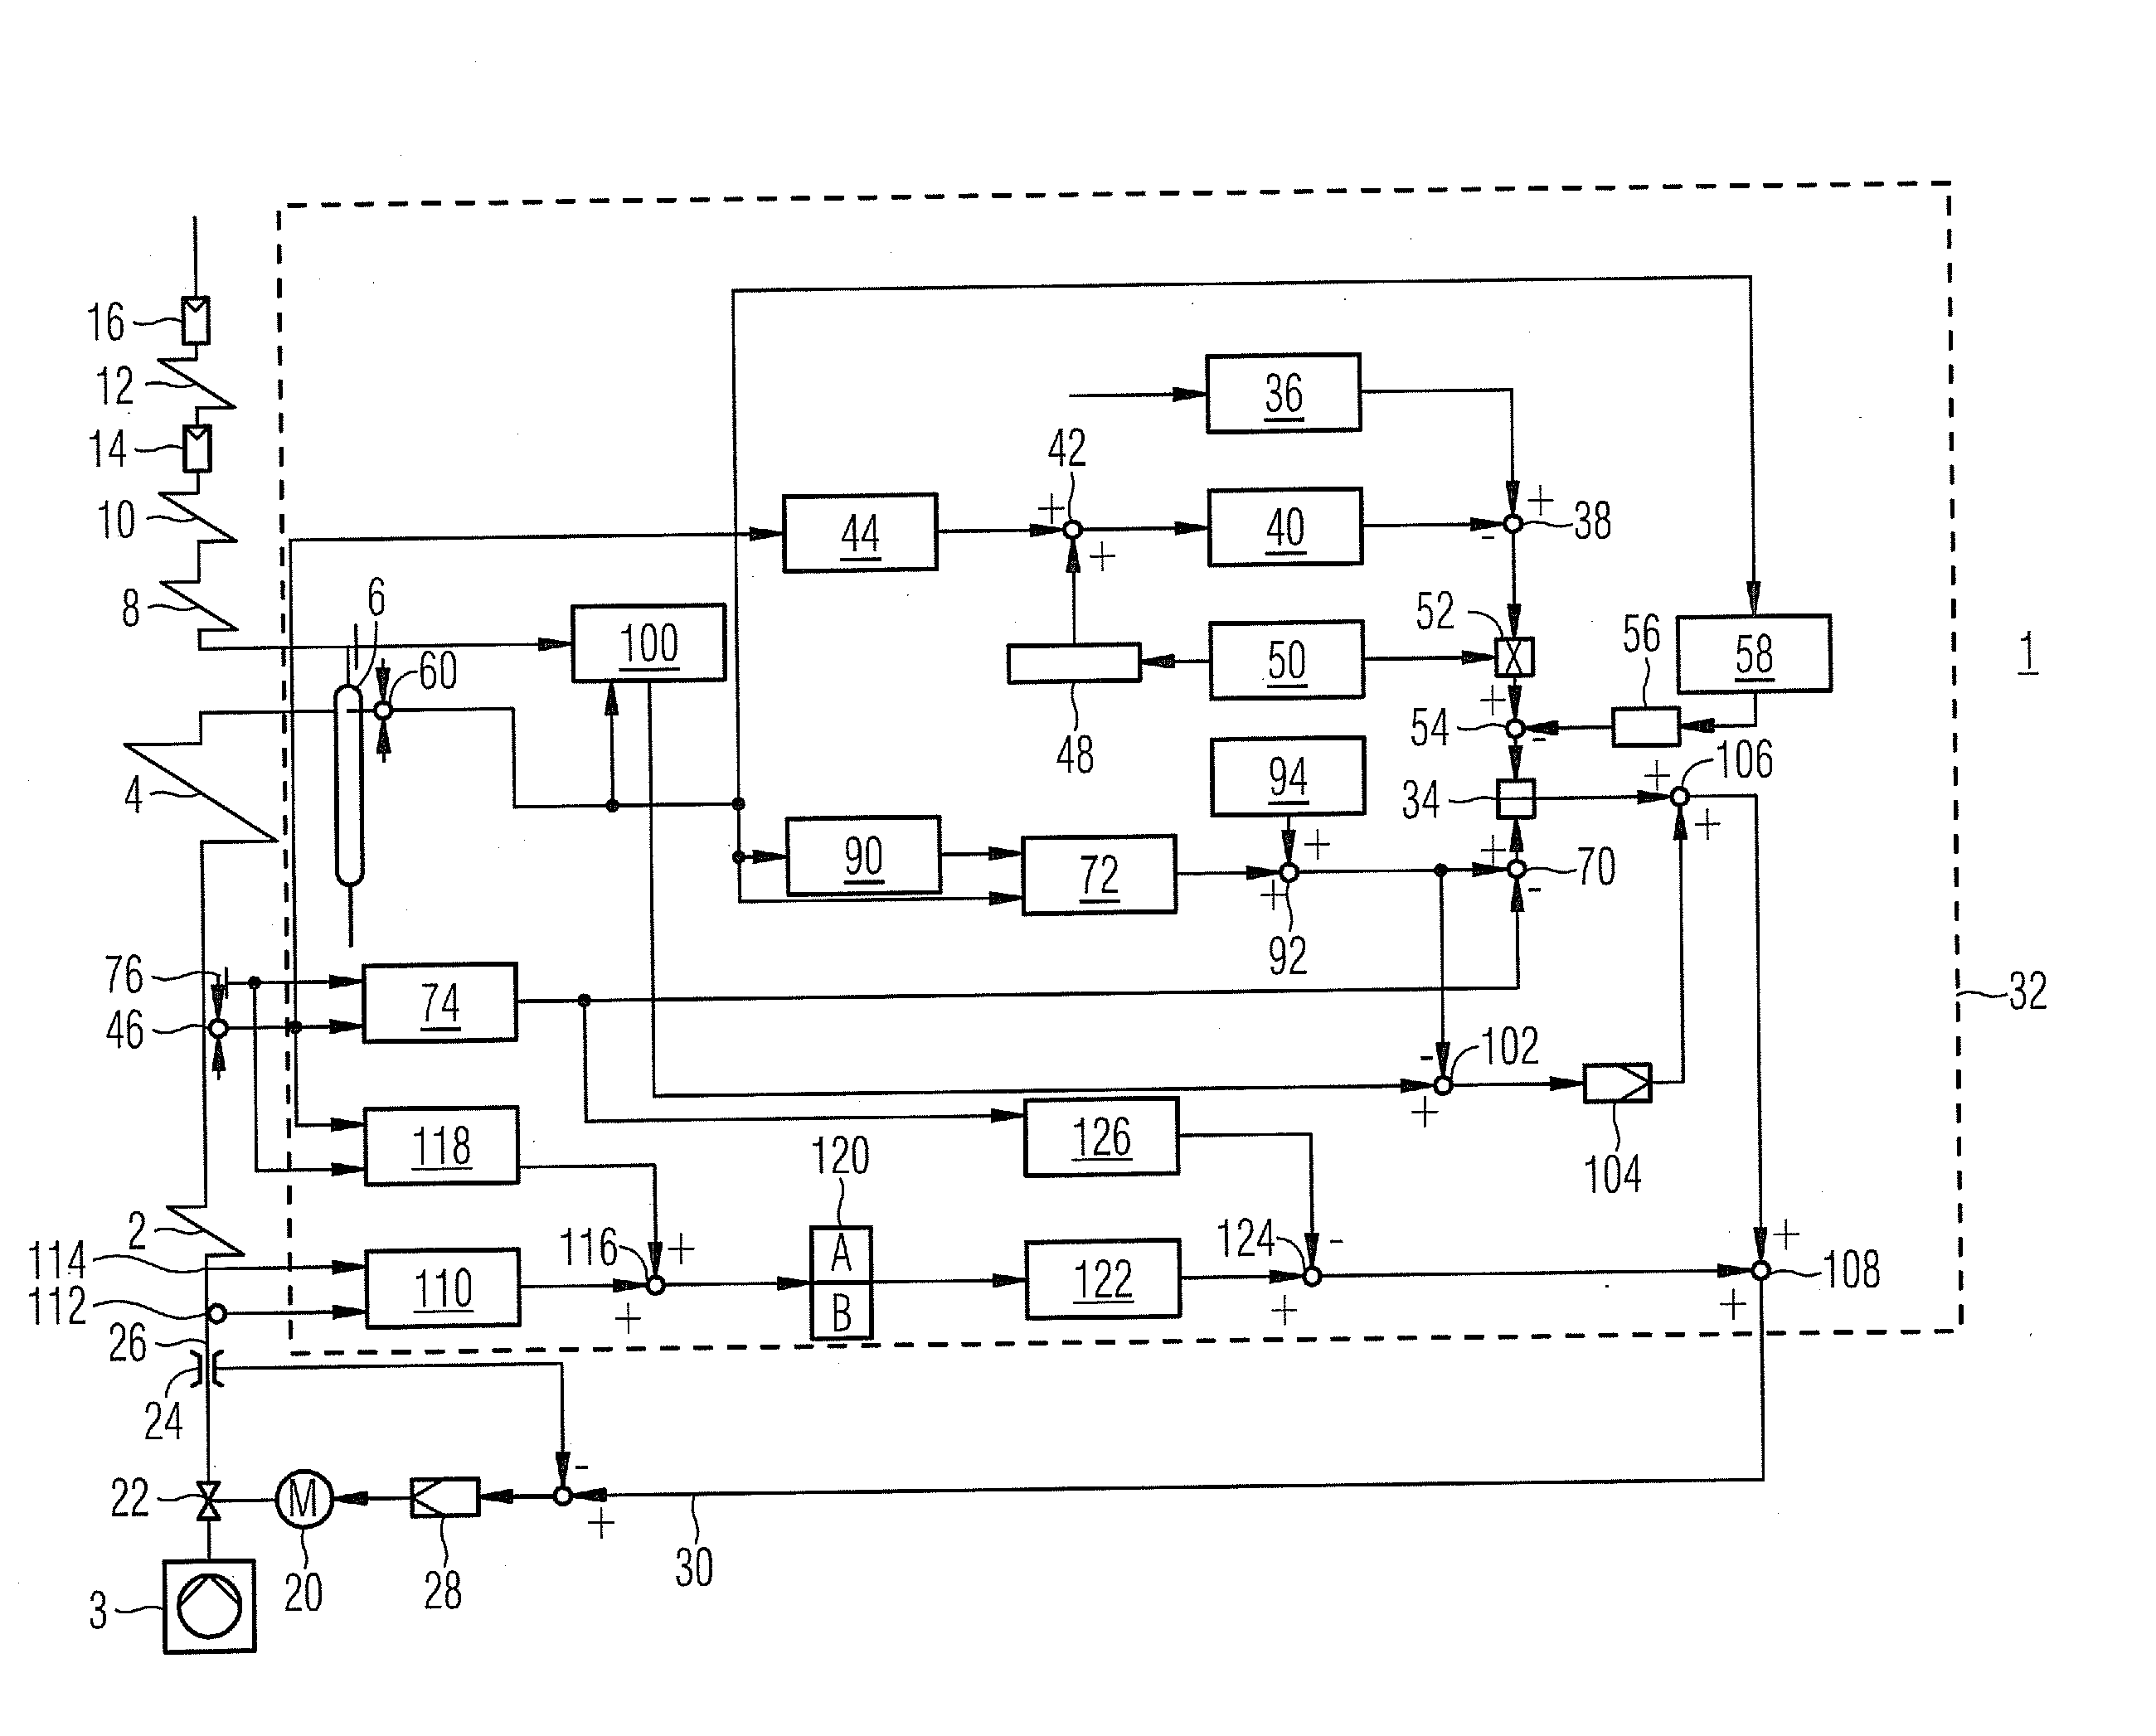 Method for operating a continuous flow steam generator